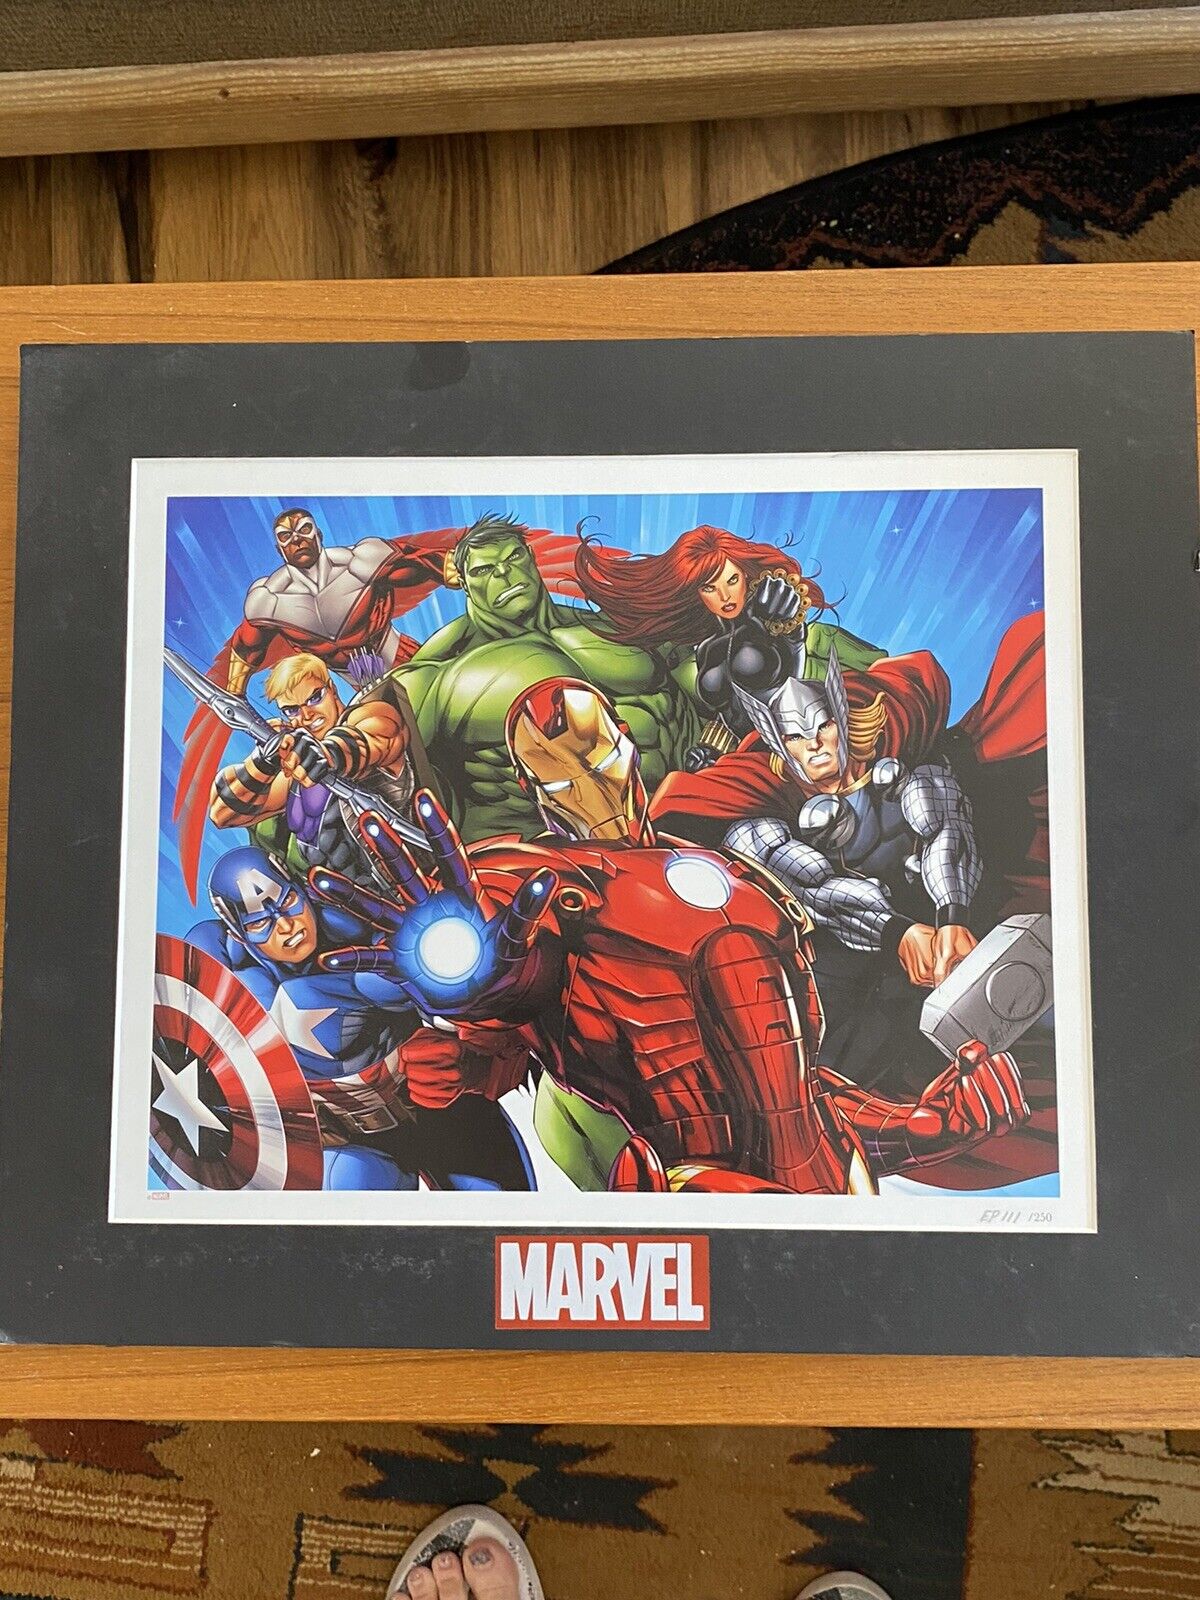 Marvel Lithograph “Heroes” EP111 of 250 With COA